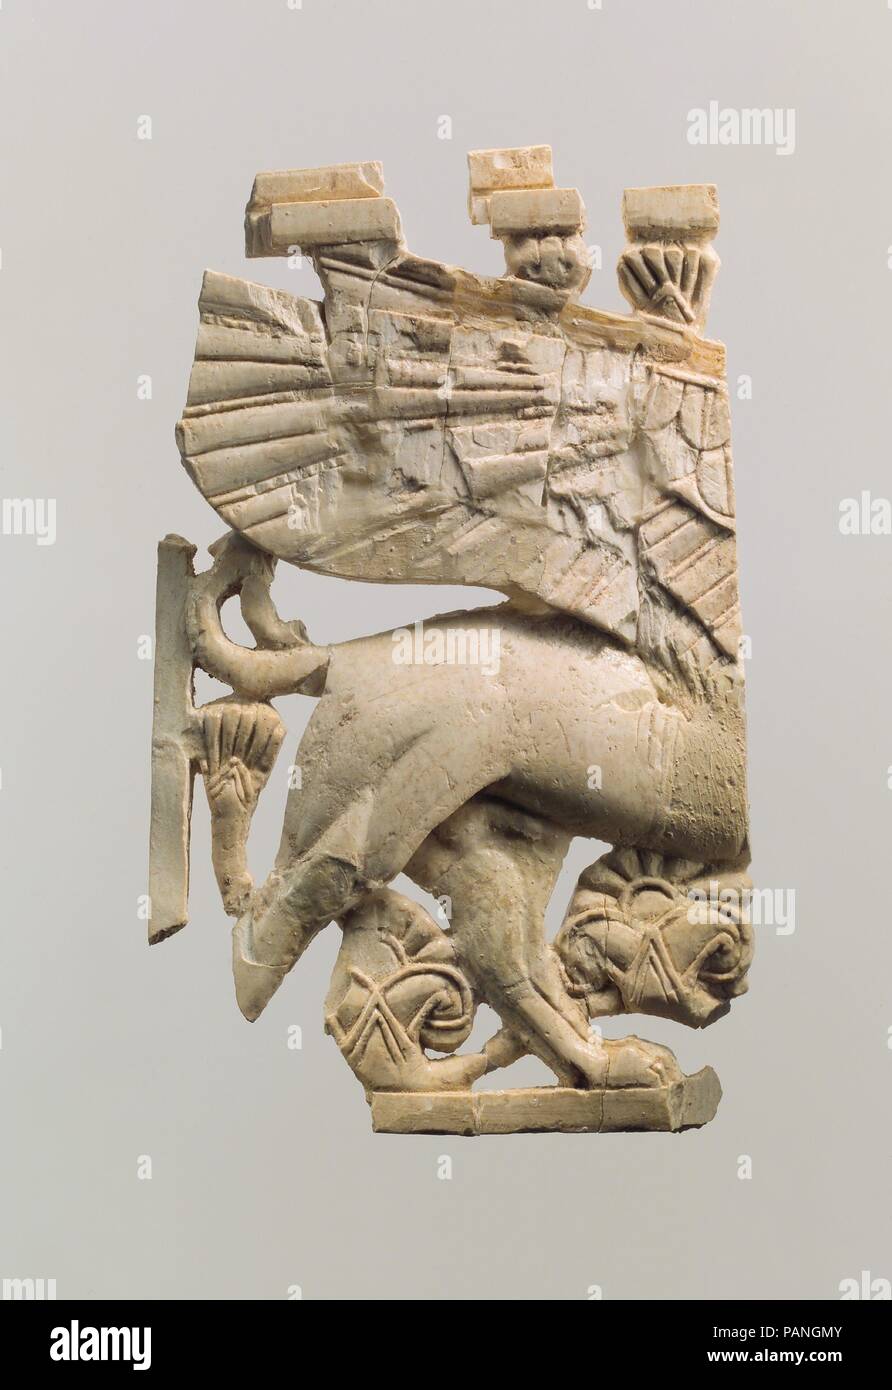 Openwork furniture plaque with sphinx. Culture: Assyrian. Dimensions: 4.06 x 2.44 x 0.39 in. (10.31 x 6.2 x 0.99 cm). Date: ca. 9th-8th century B.C..  During the early first millennium B.C., ivory carving was one of the major luxury arts that flourished throughout the ancient Near East. Elephant tusks were carved into small decorative objects such as cosmetic boxes and plaques used to adorn wooden furniture. Gold foil, paint, and semiprecious stone and glass inlay embellishments enlivened these magnificent works of art. Based on certain stylistic, formal, and technical characteristics also vis Stock Photo